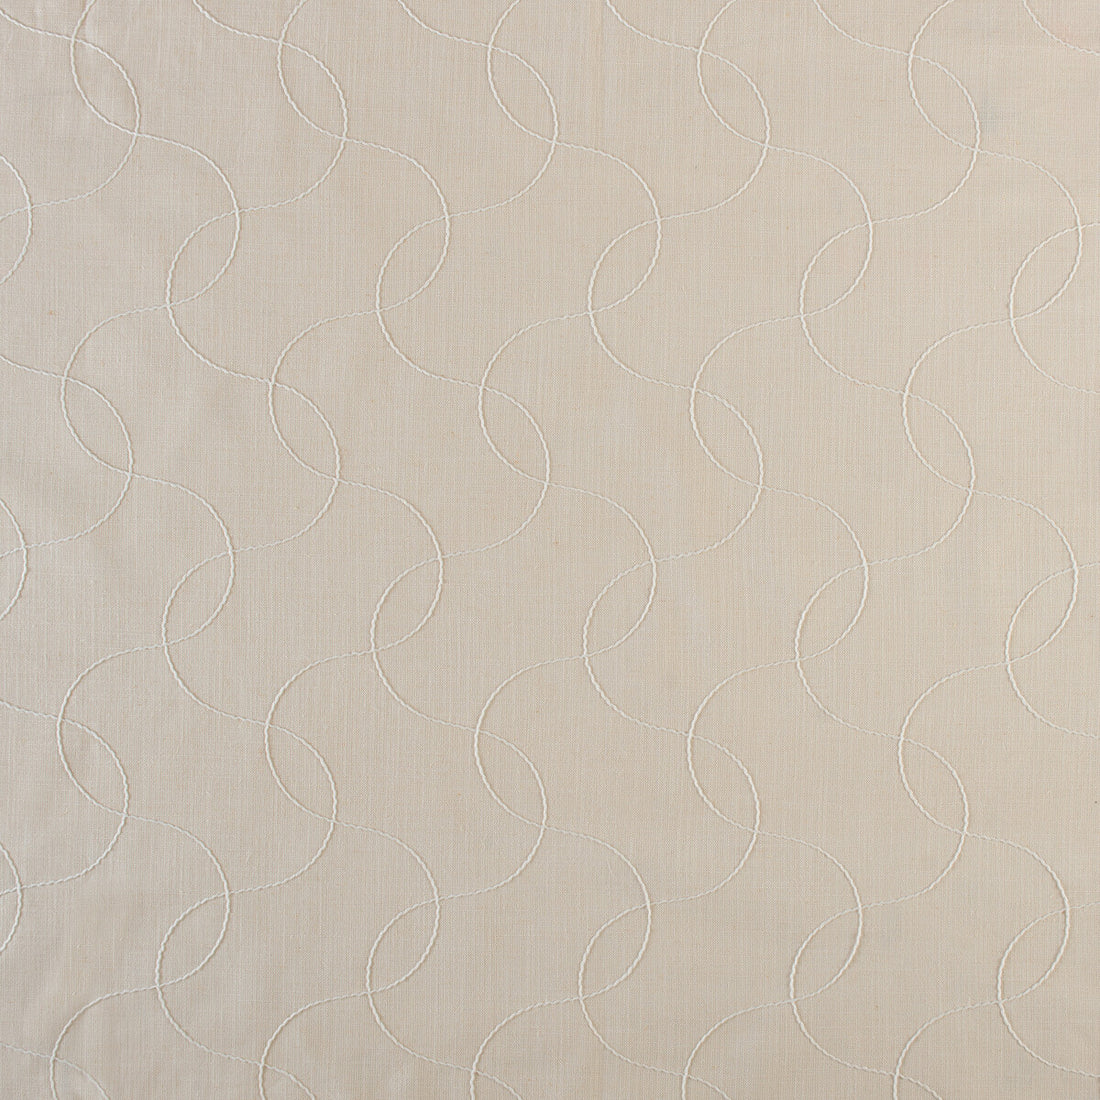 Awander fabric in ivory color - pattern 35898.1.0 - by Kravet Design in the Barbara Barry Home Midsummer collection